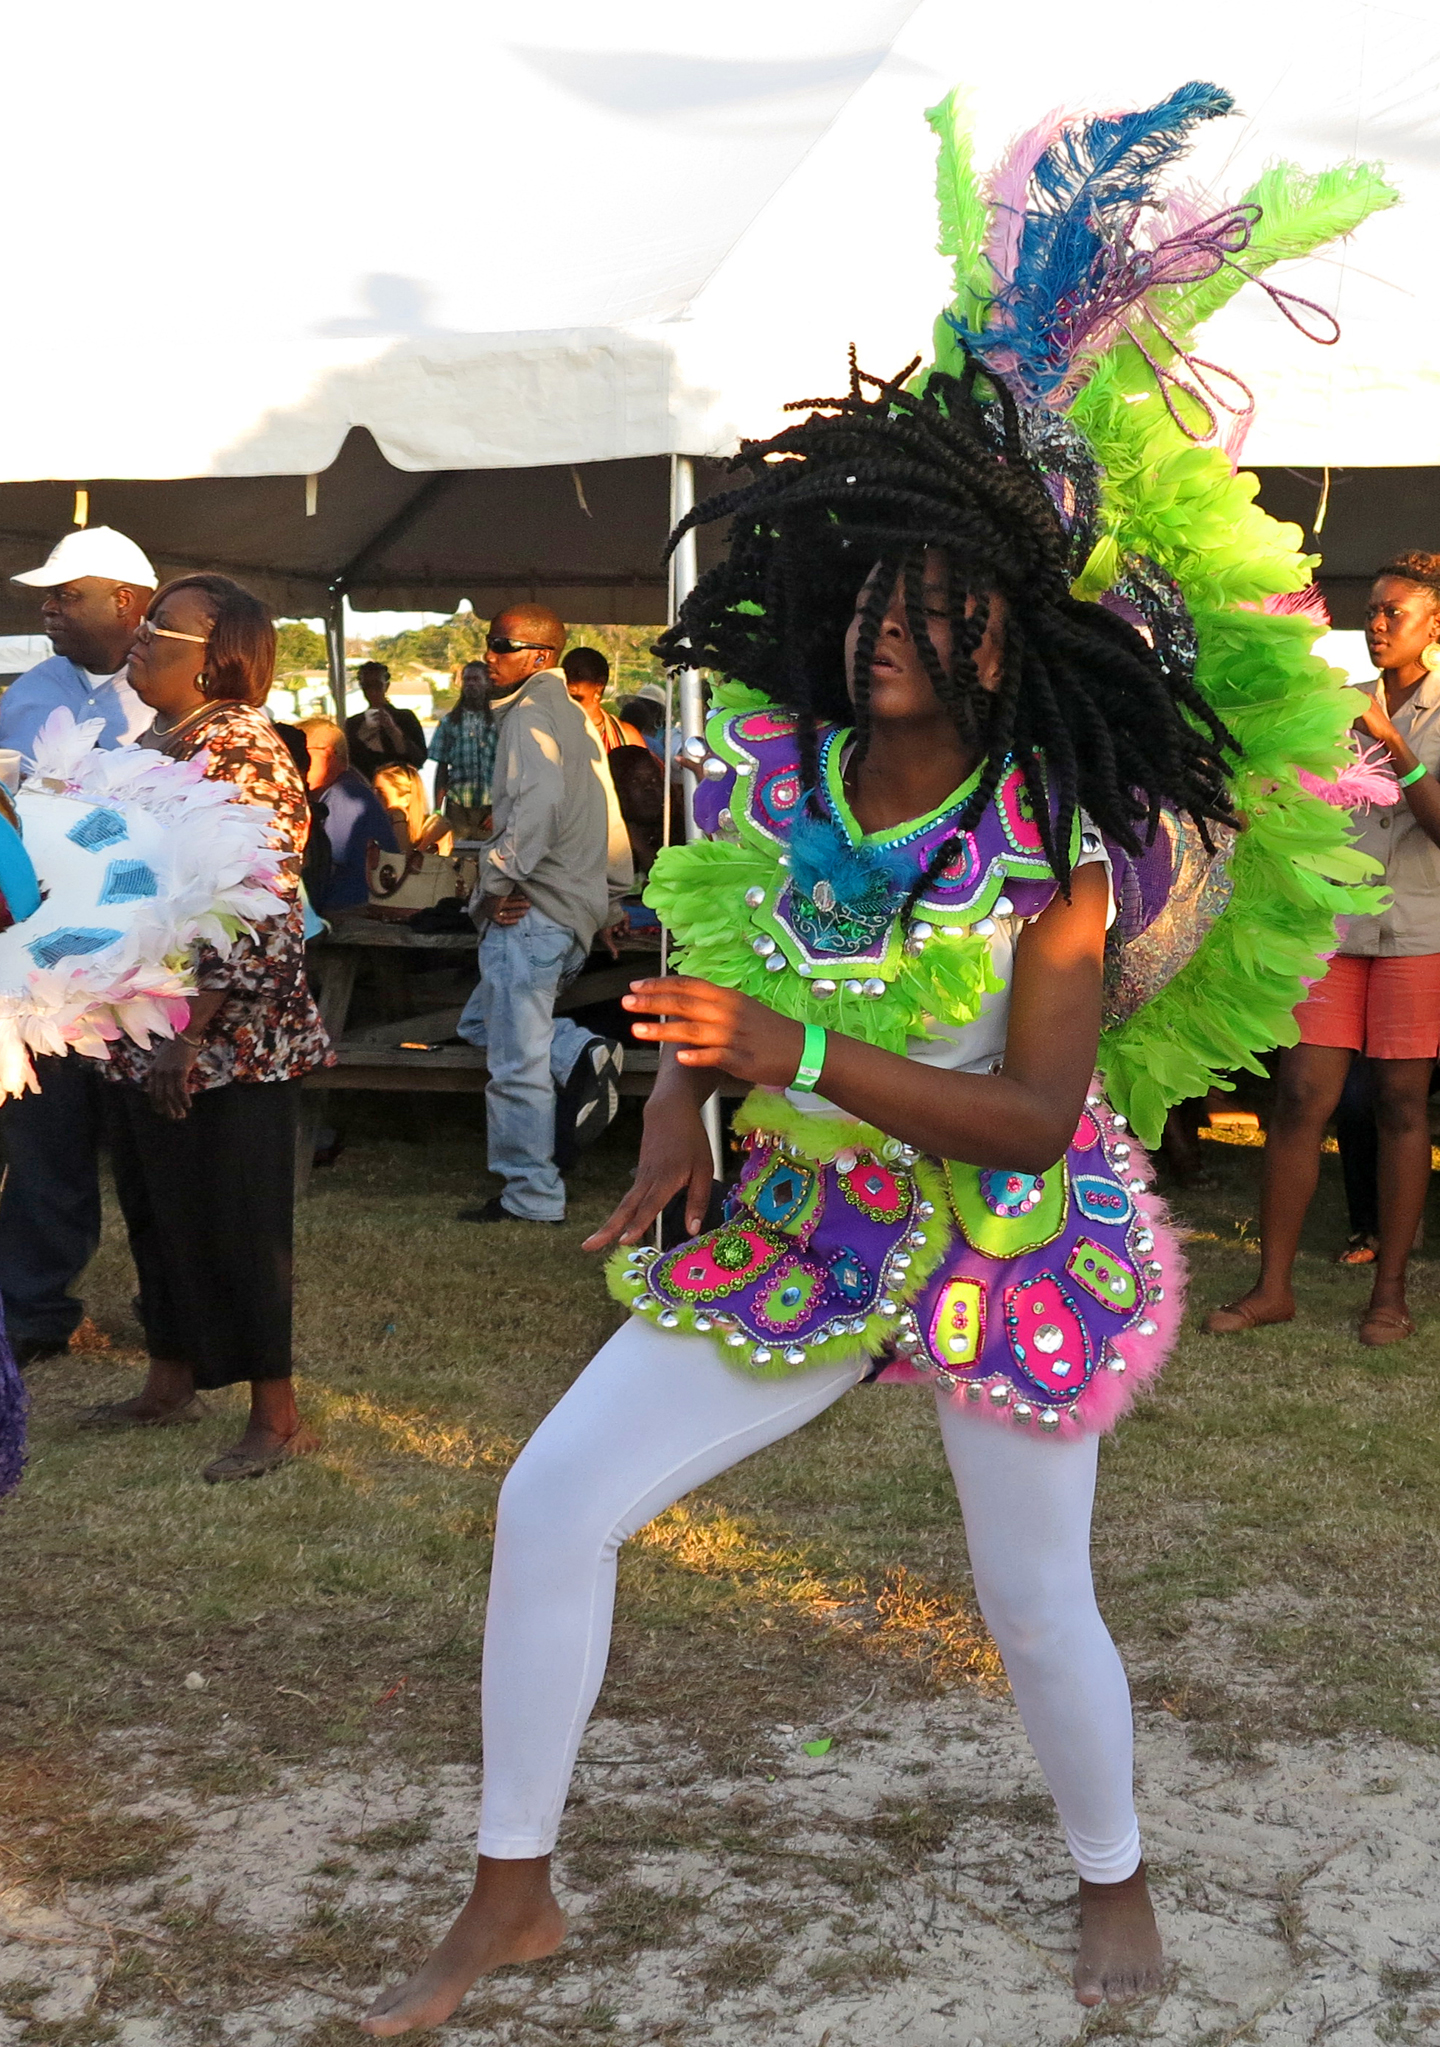 Island Roots Heritage Festival 2016 - Green Turtle Cay, Bahamas